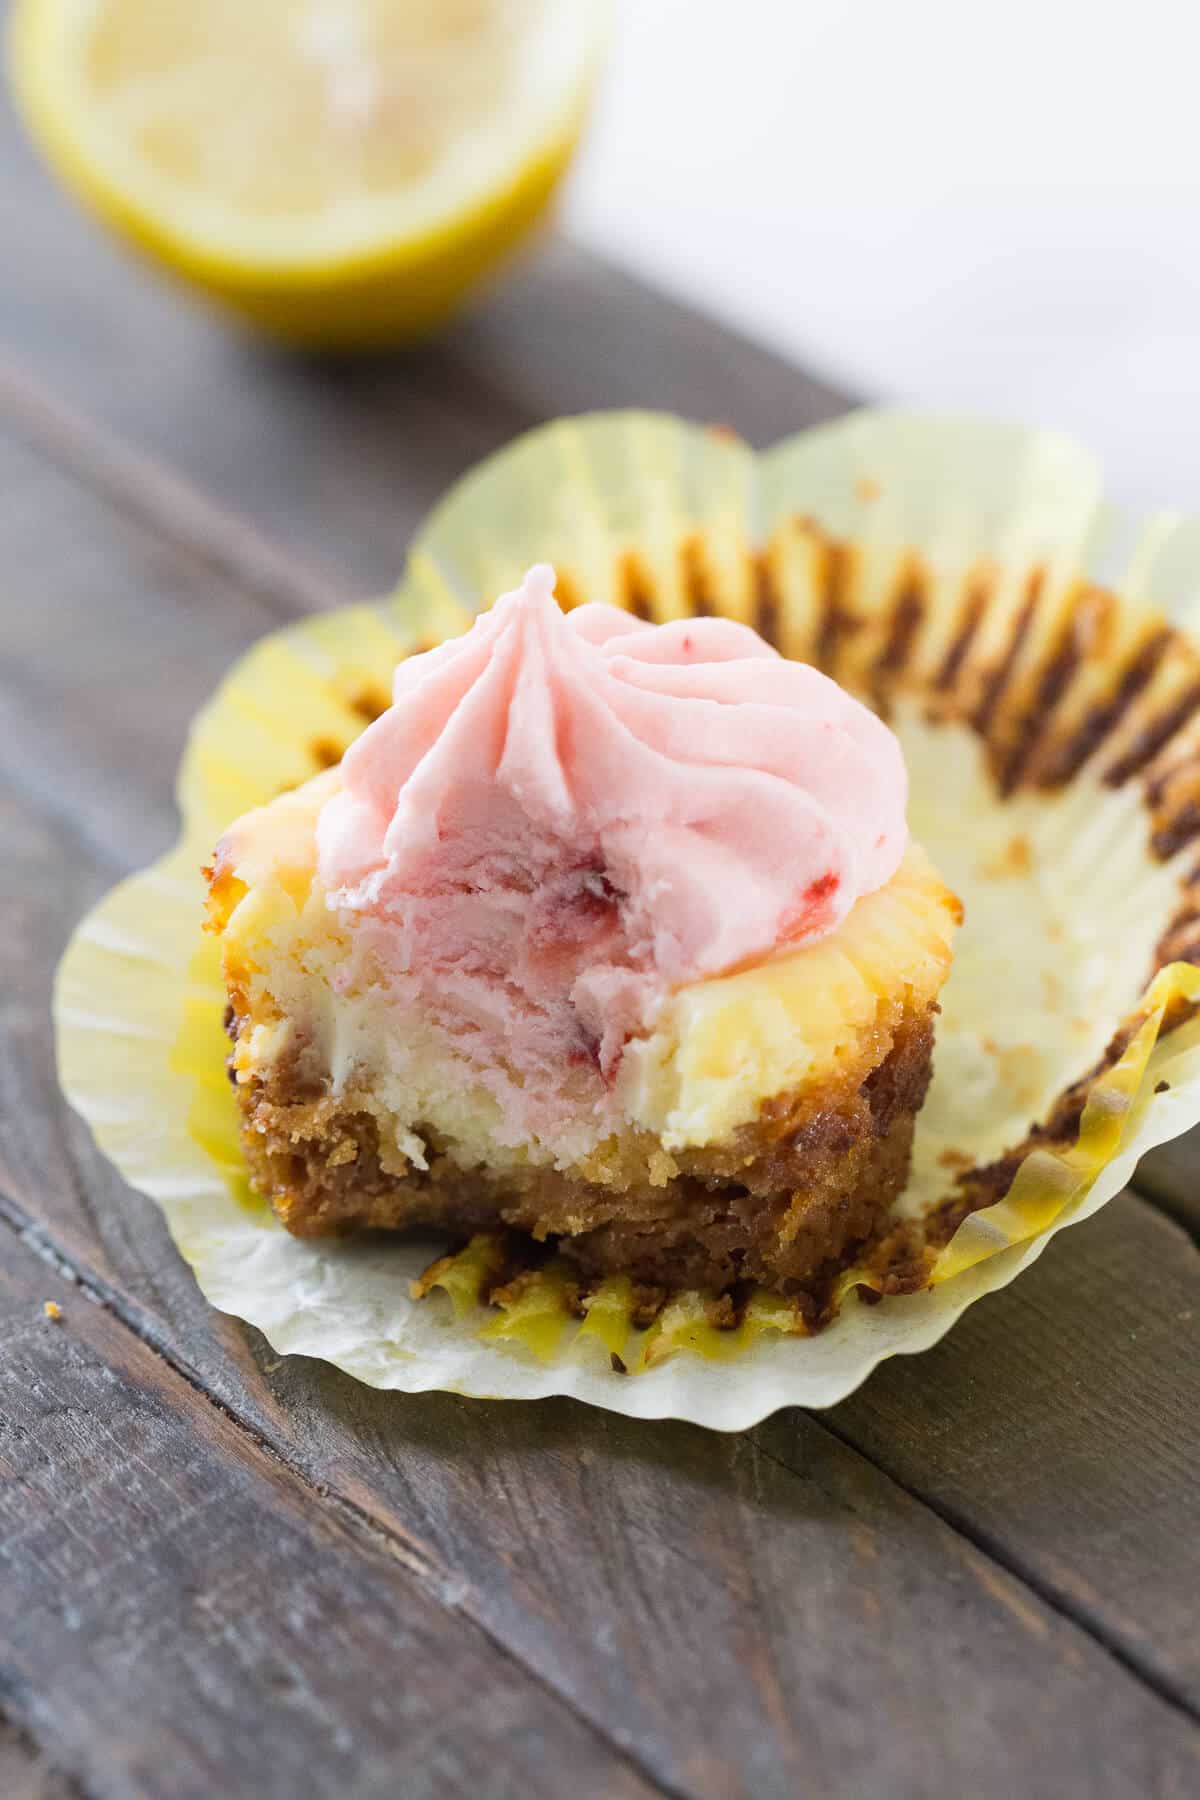 Strawberry Lemonade cheesecakes are fresh and bright! This flavor combo is addicting!